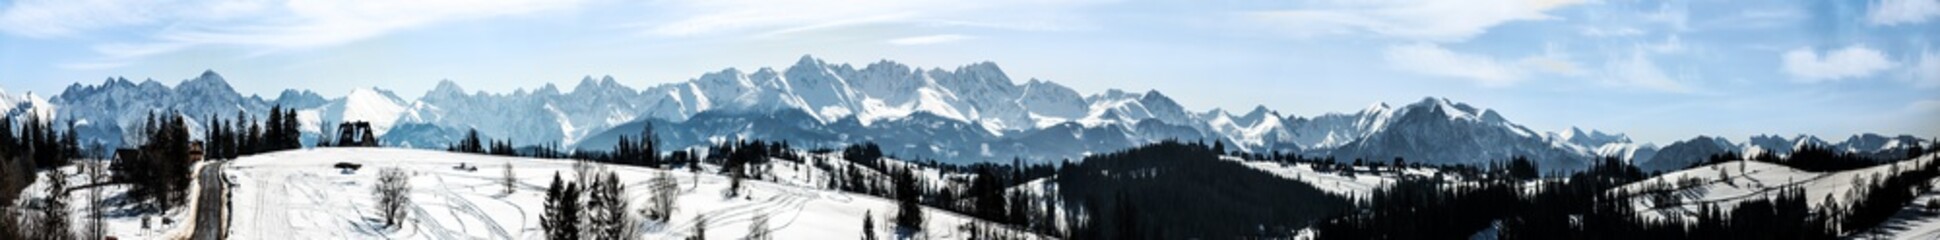 Extra wide panorama of Tatra mountains in winter viewed from Bukowina Tatrzanska in Poland. Good for a banner.